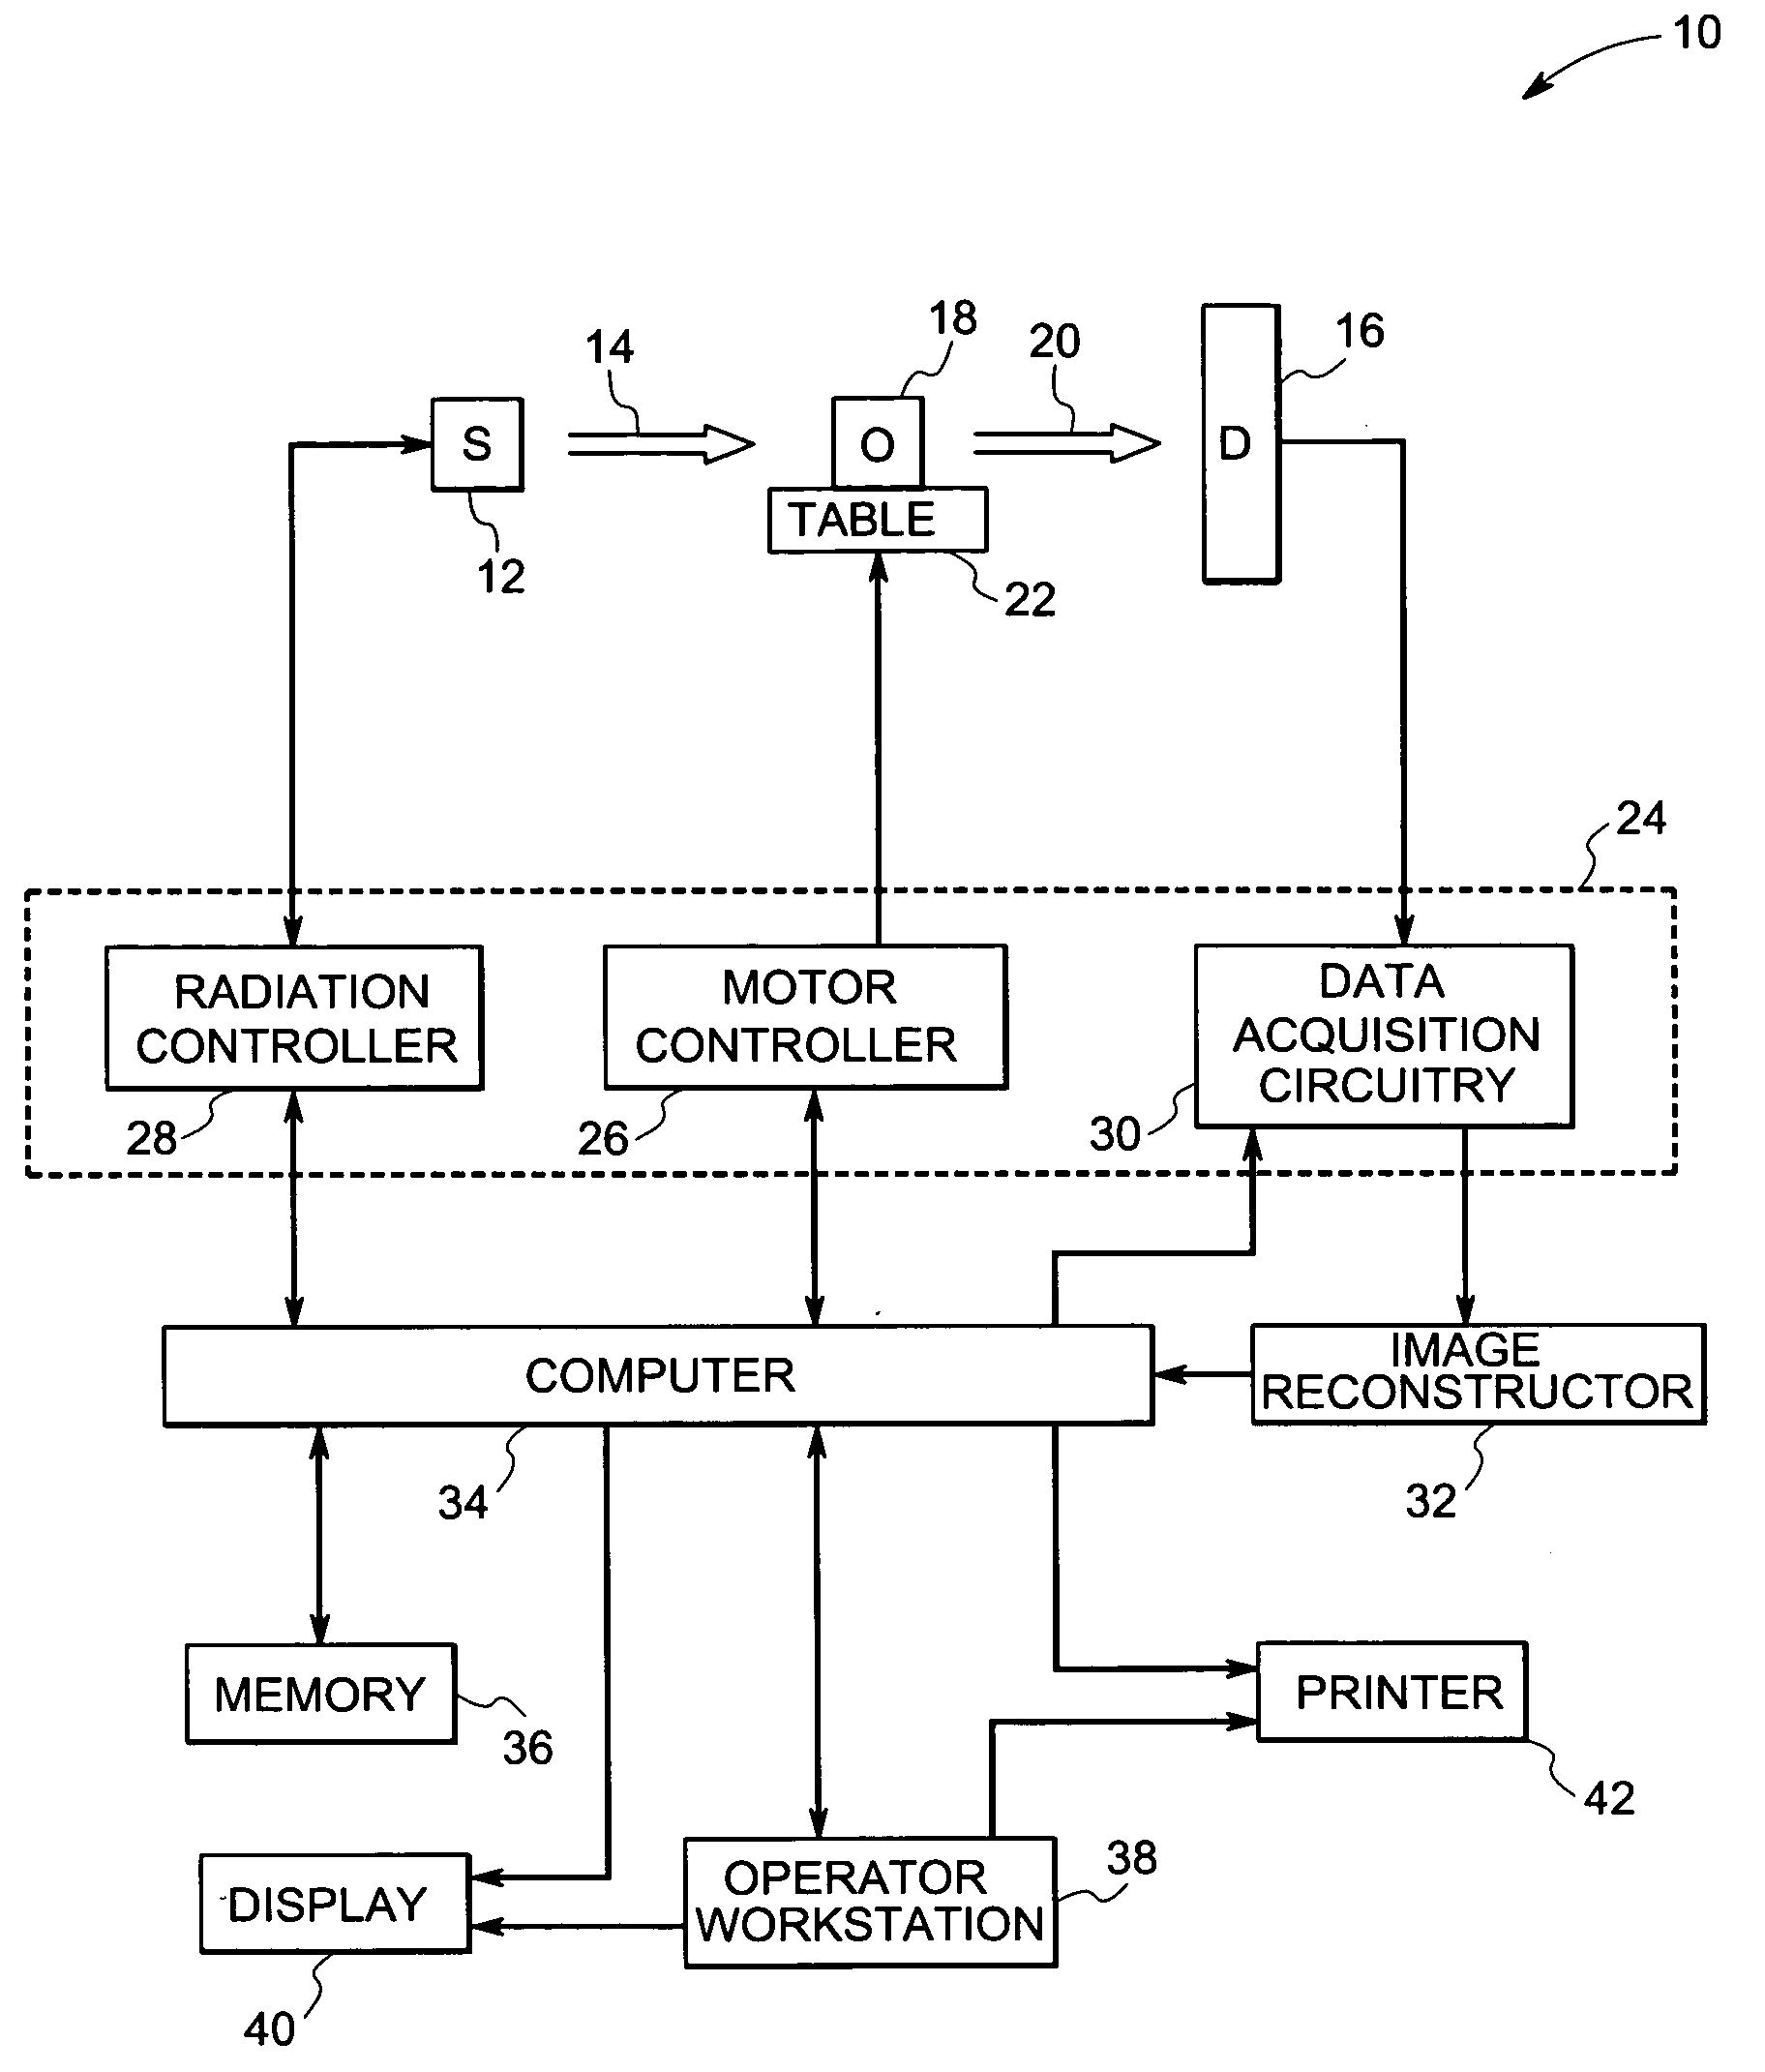 System and method for boundary estimation using CT metrology